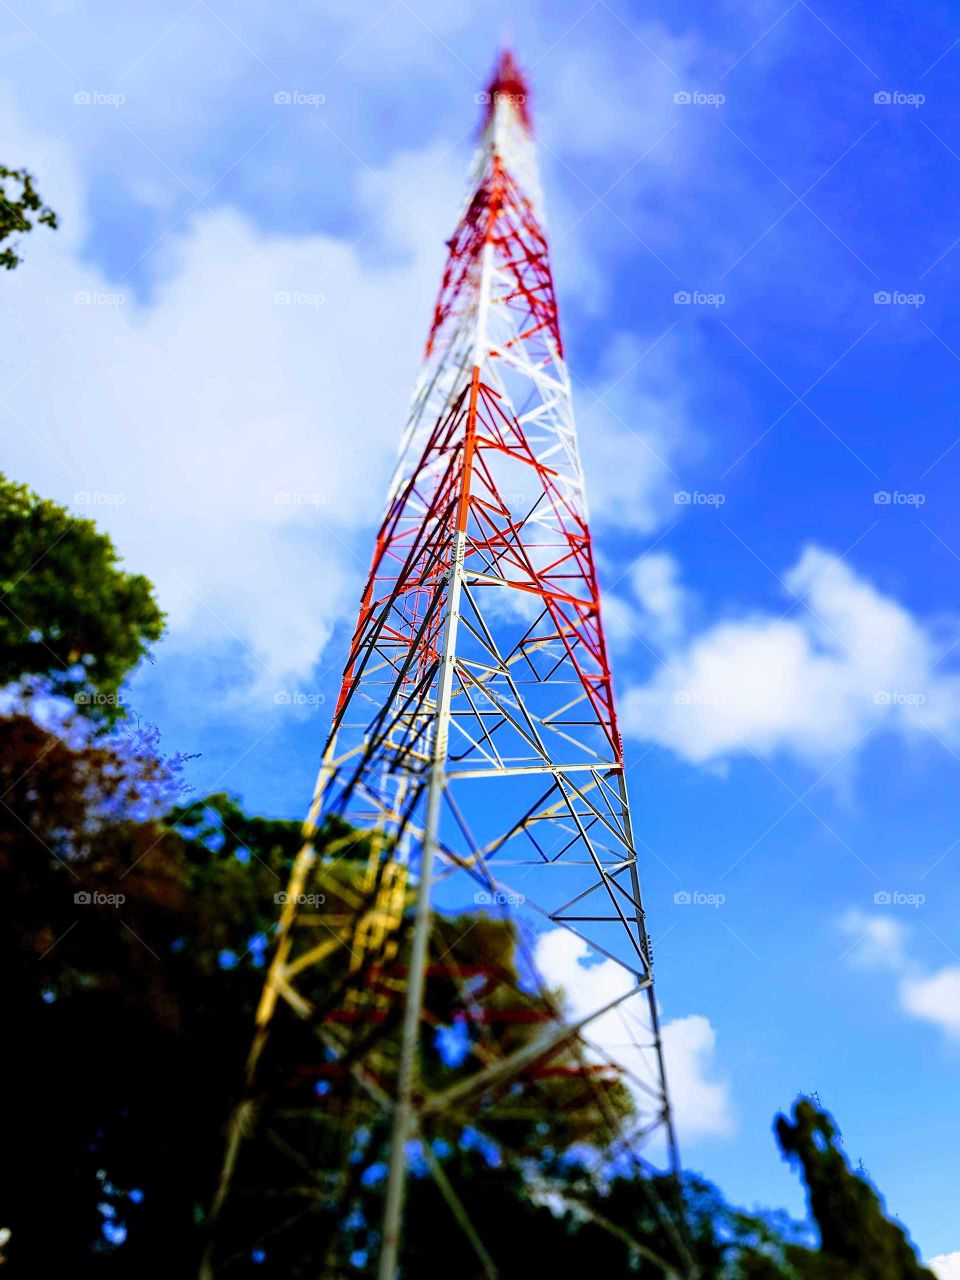 the full view of a cell tower with the blue skies behind it and the lush green trees also framing it.